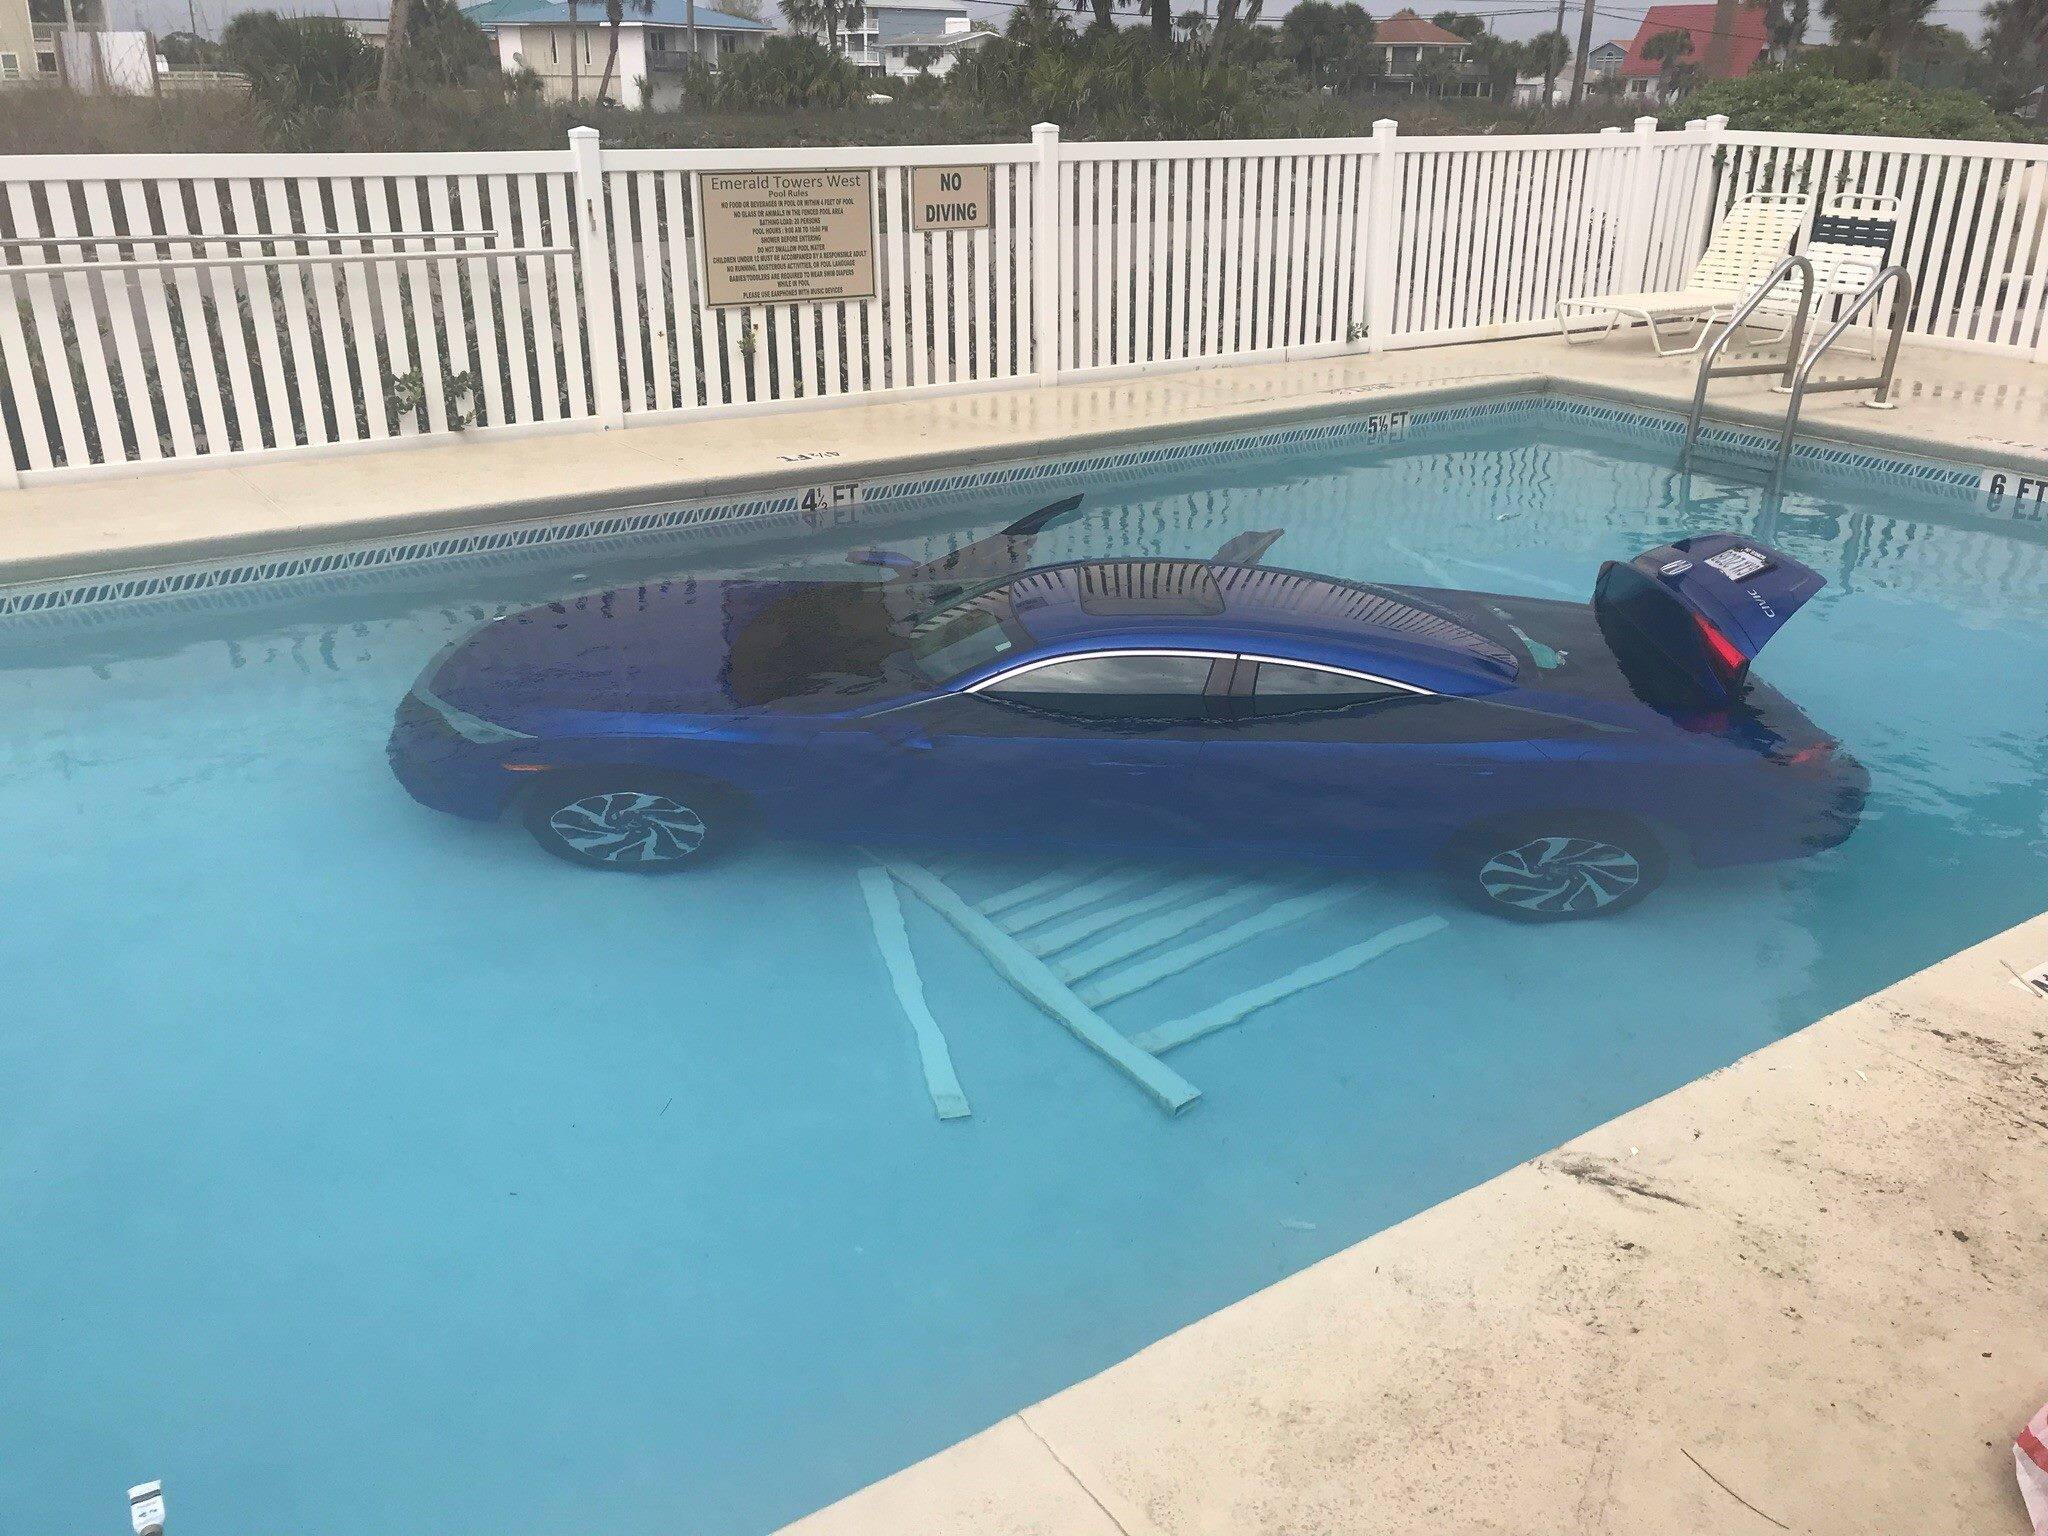 women forgets to park carlater found in pool